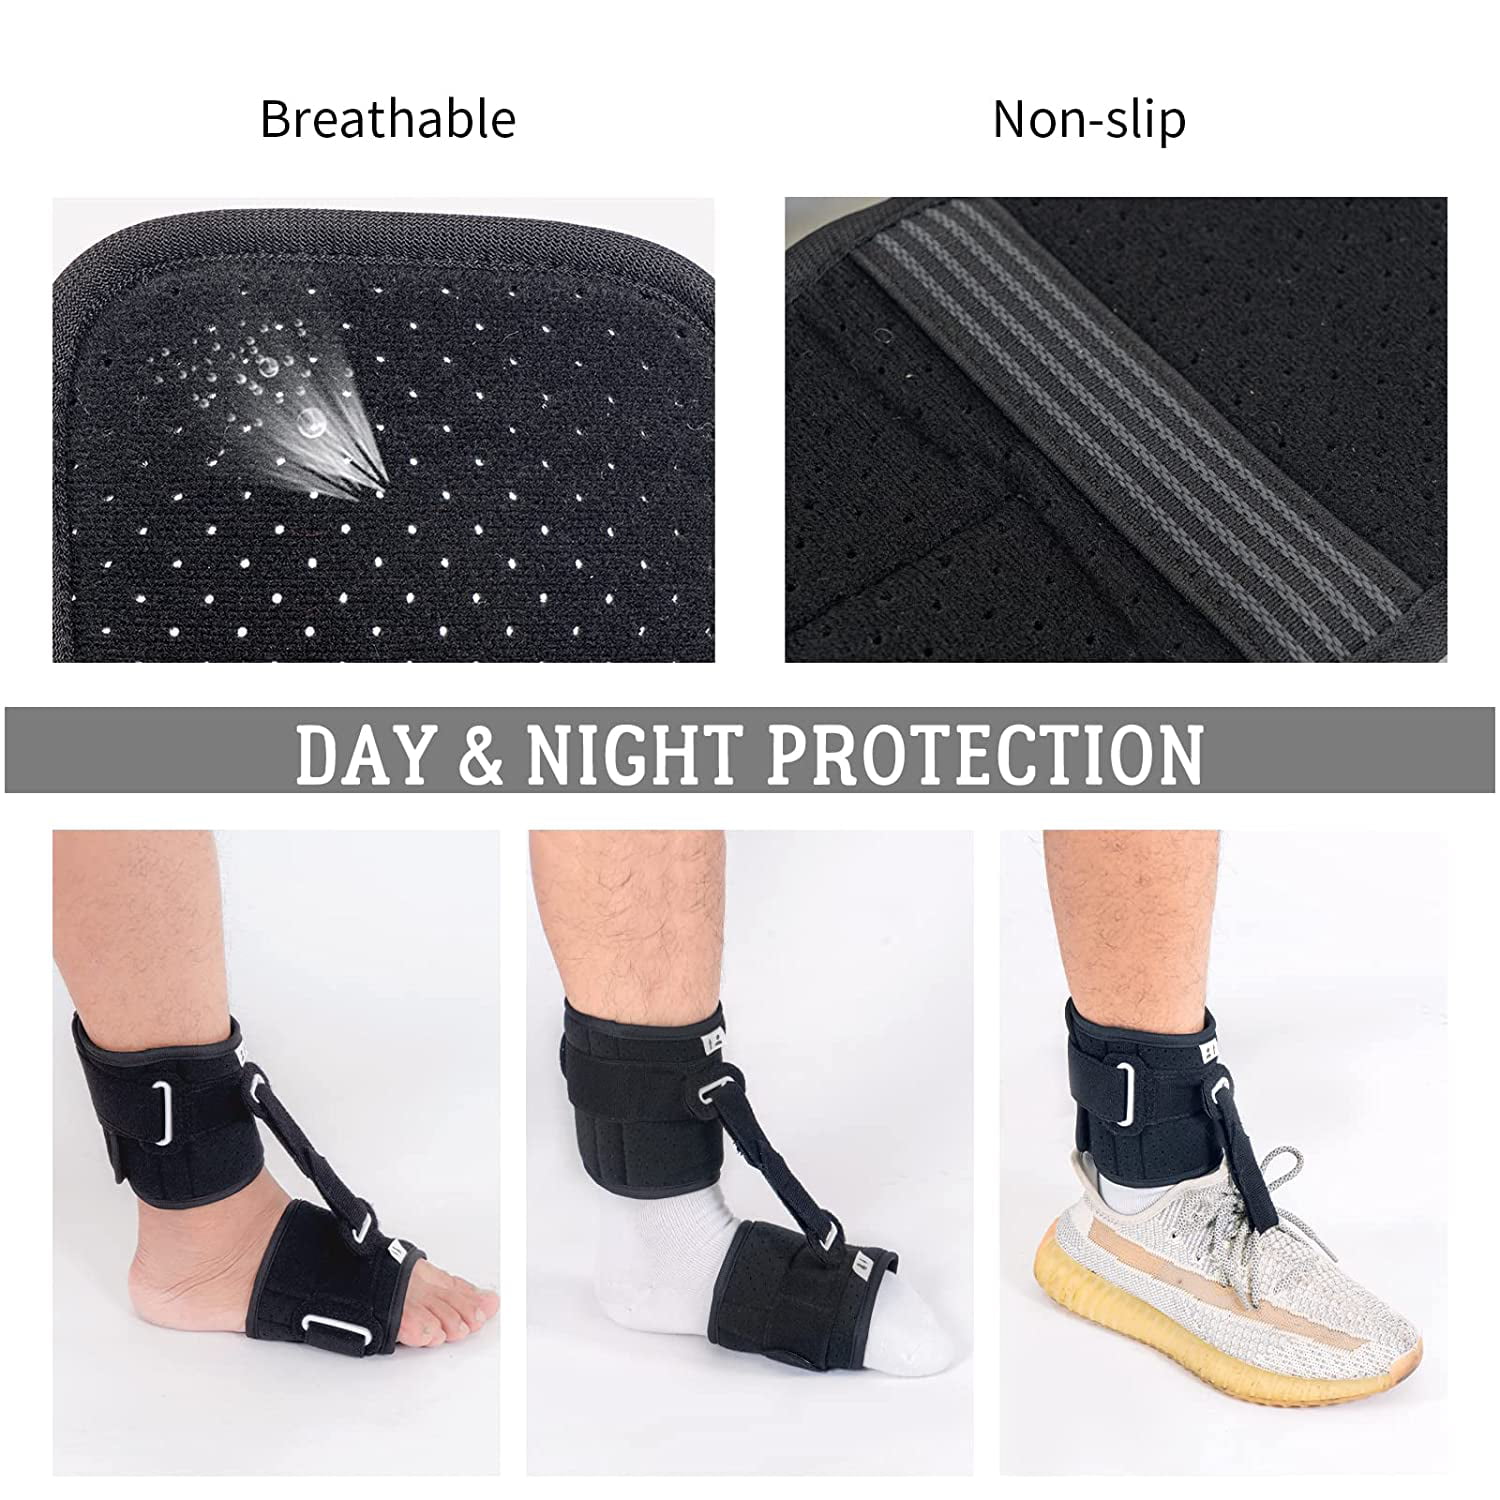 Foot Up AFO Foot Drop Brace Adjustable Ankle Foot Orthosis Support